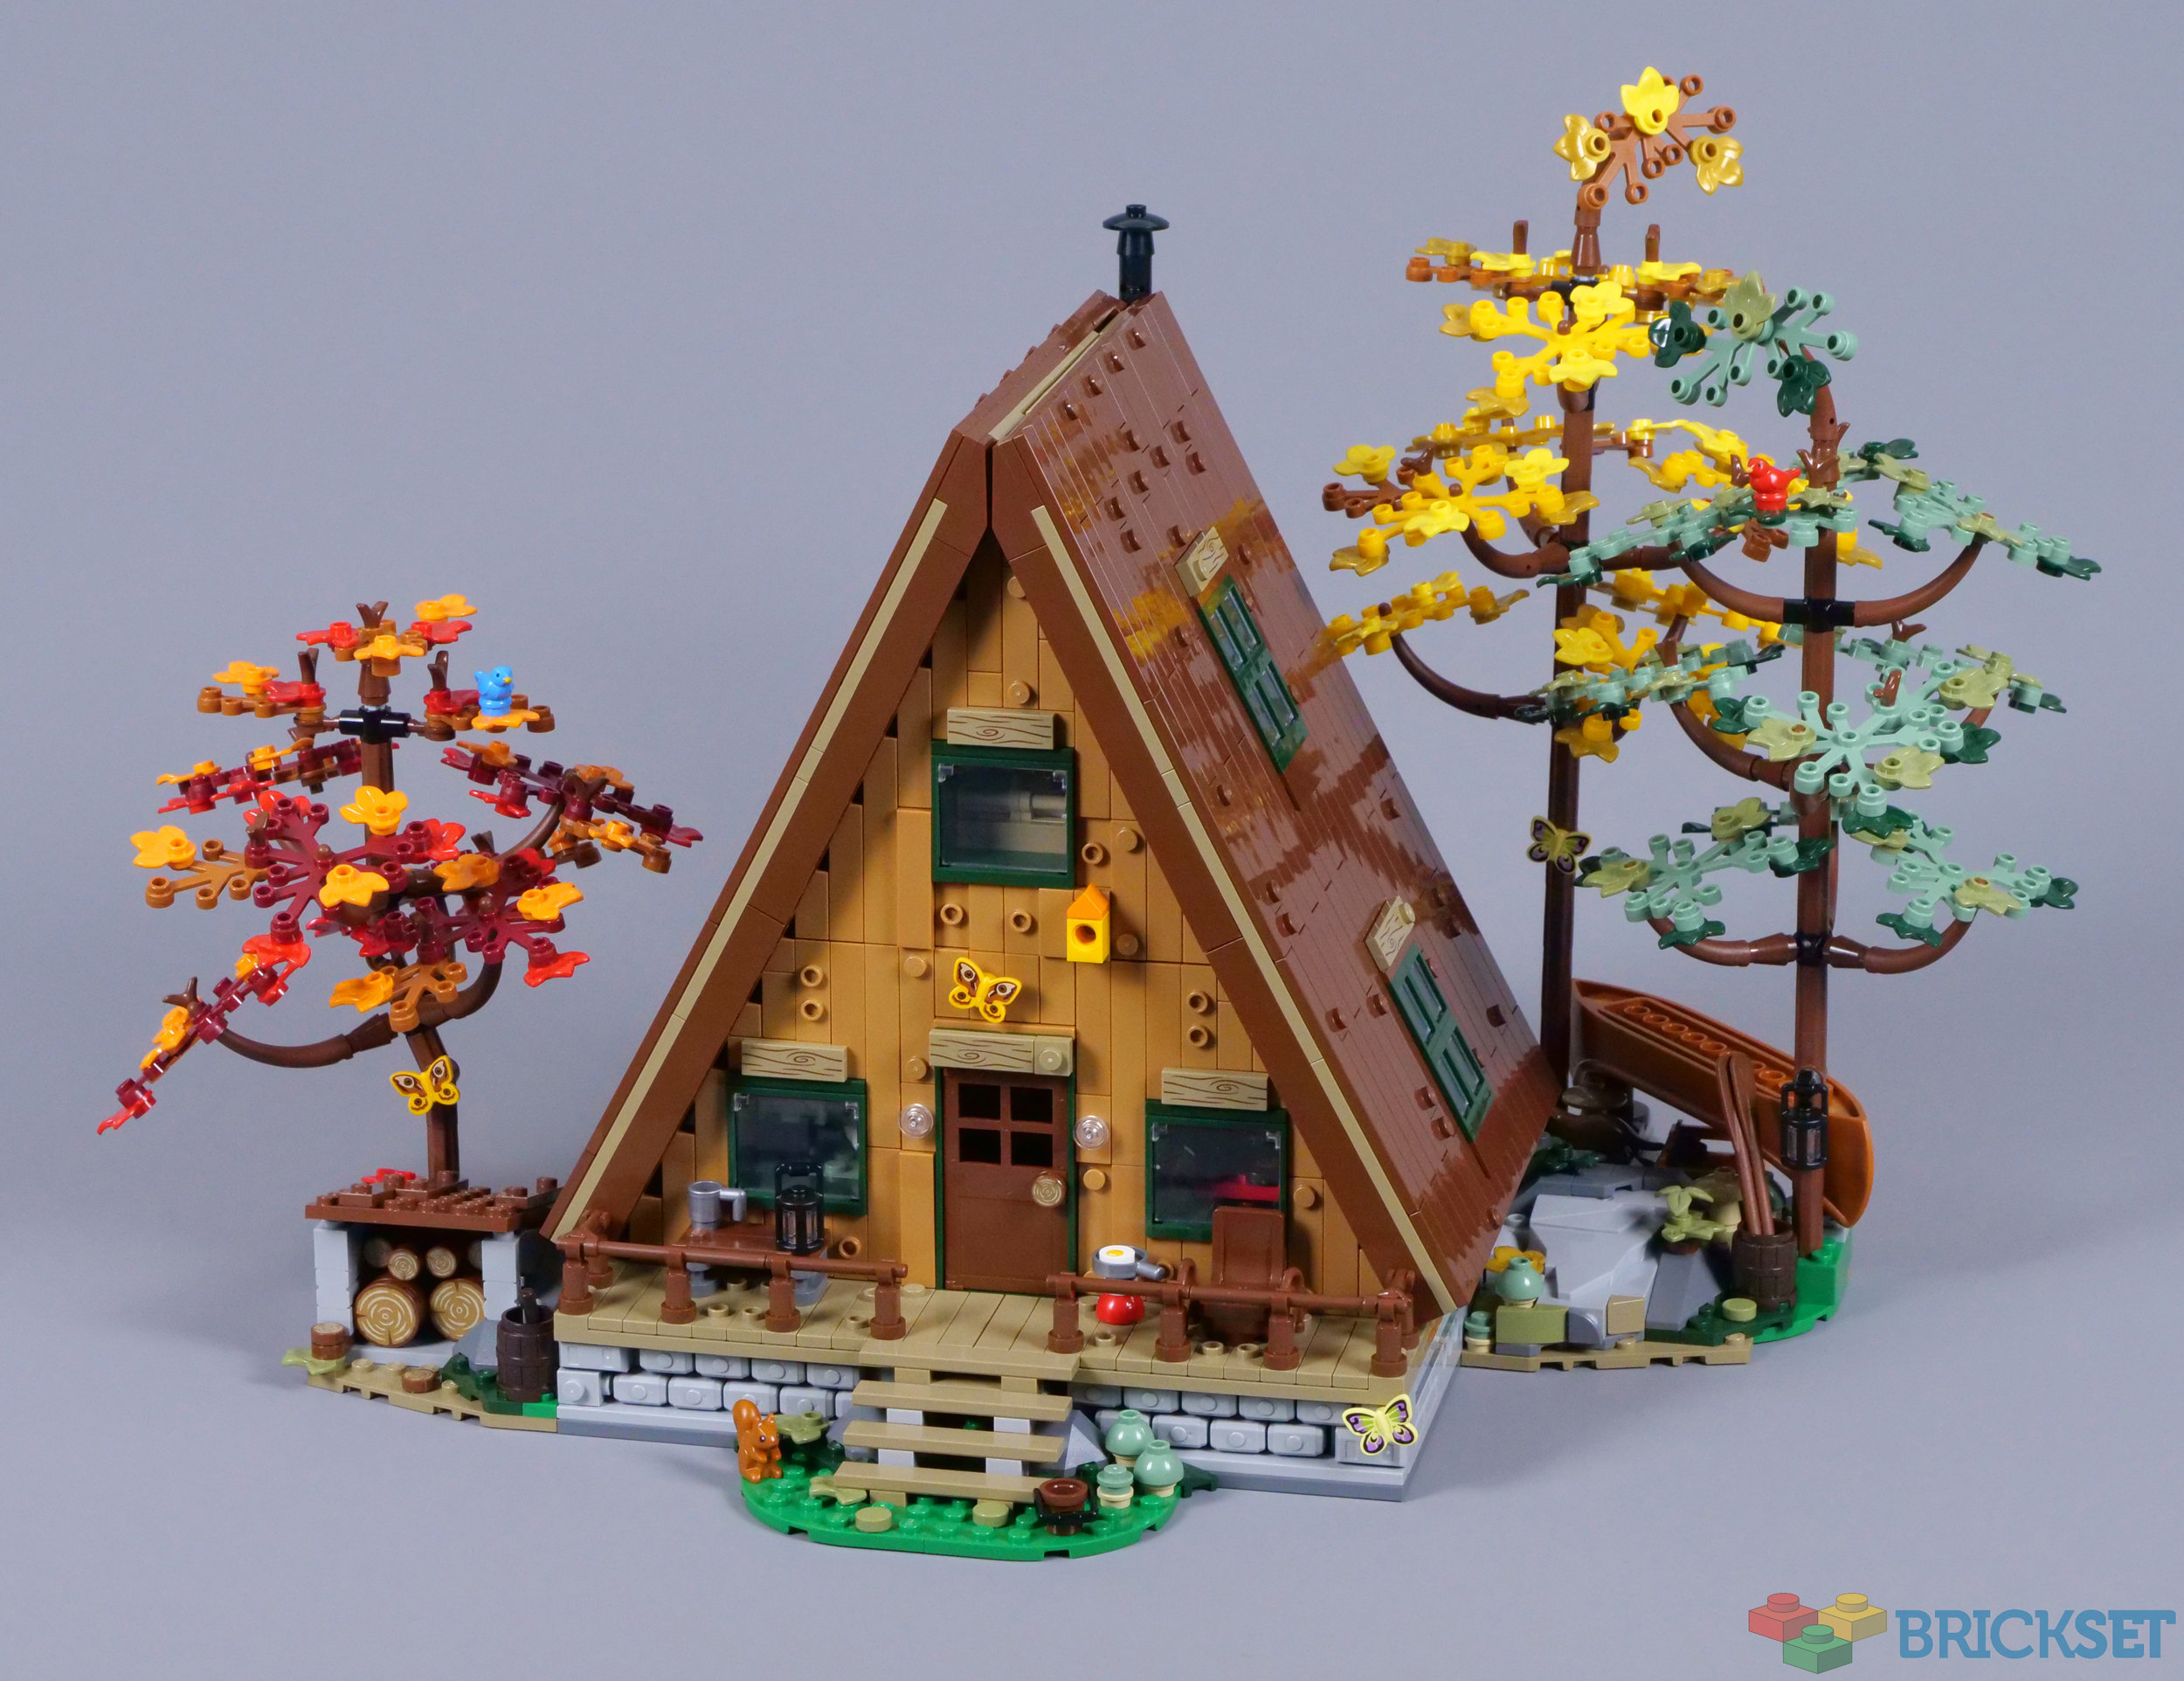 LEGO 21338 A-Frame Cabin review